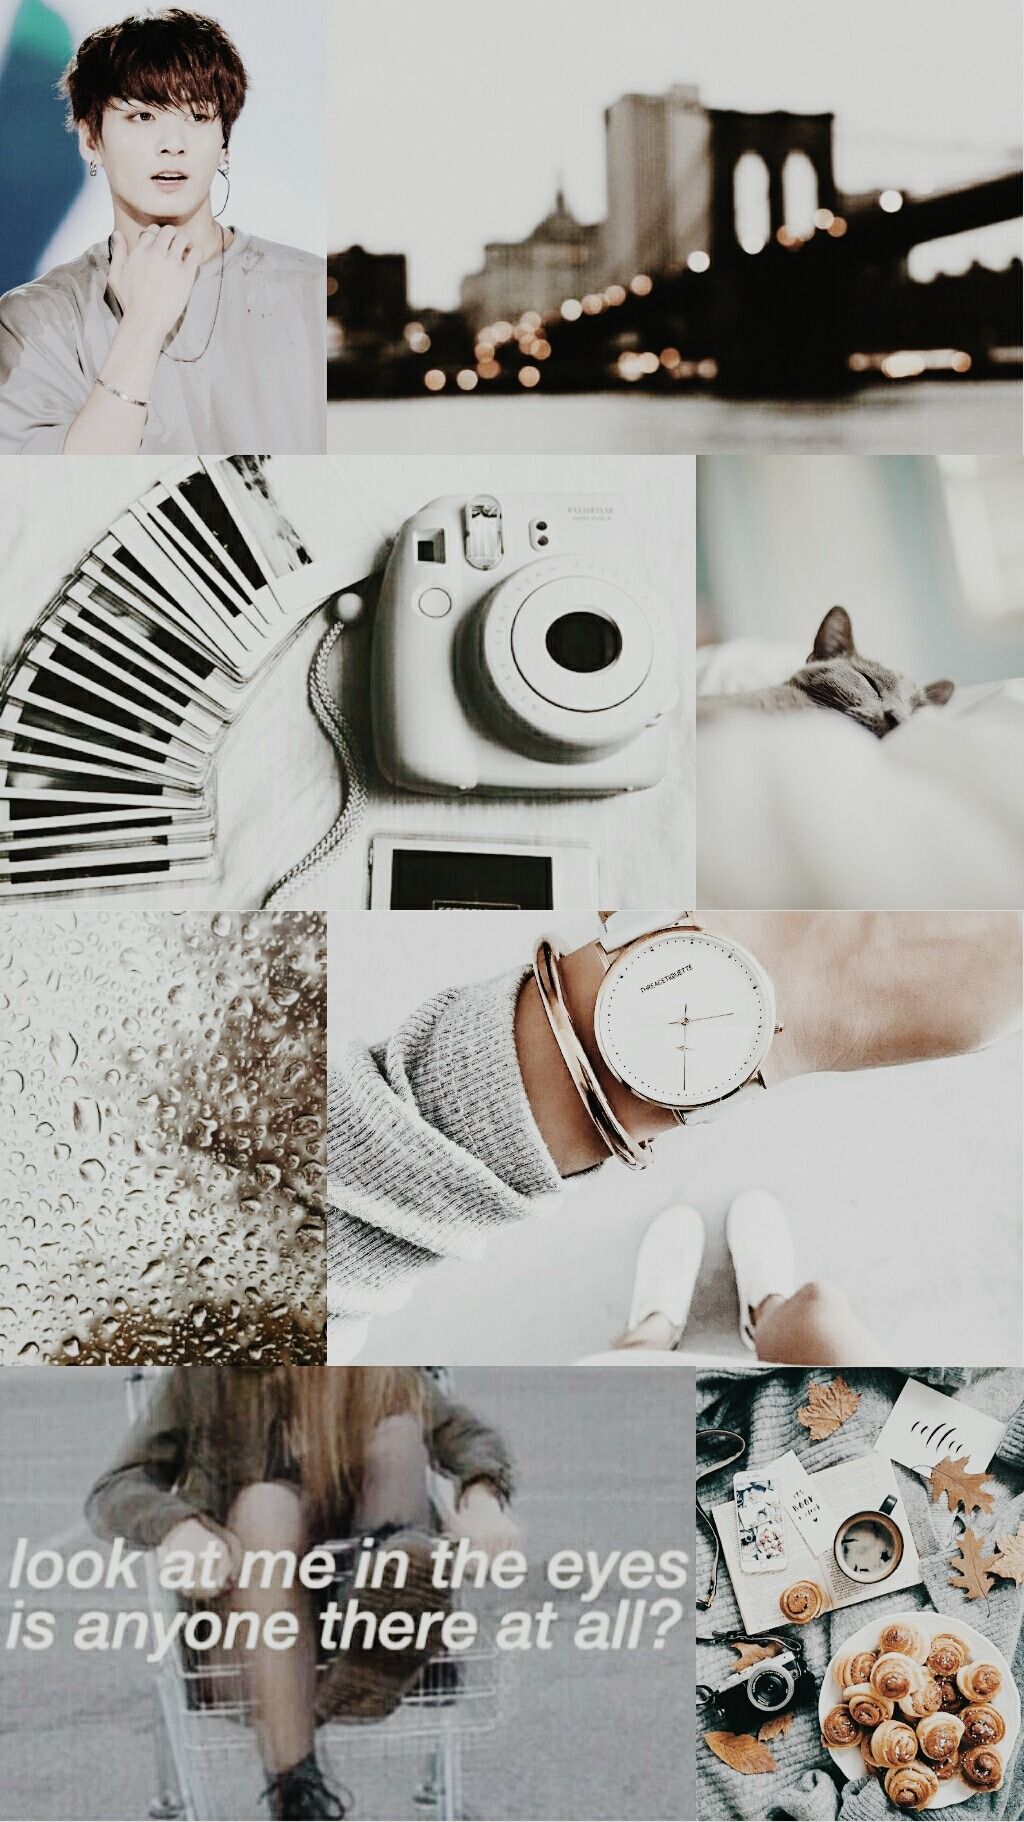 A collage of photos including a polaroid camera, a watch, and a picture of EXO member Kai - BTS, Jungkook